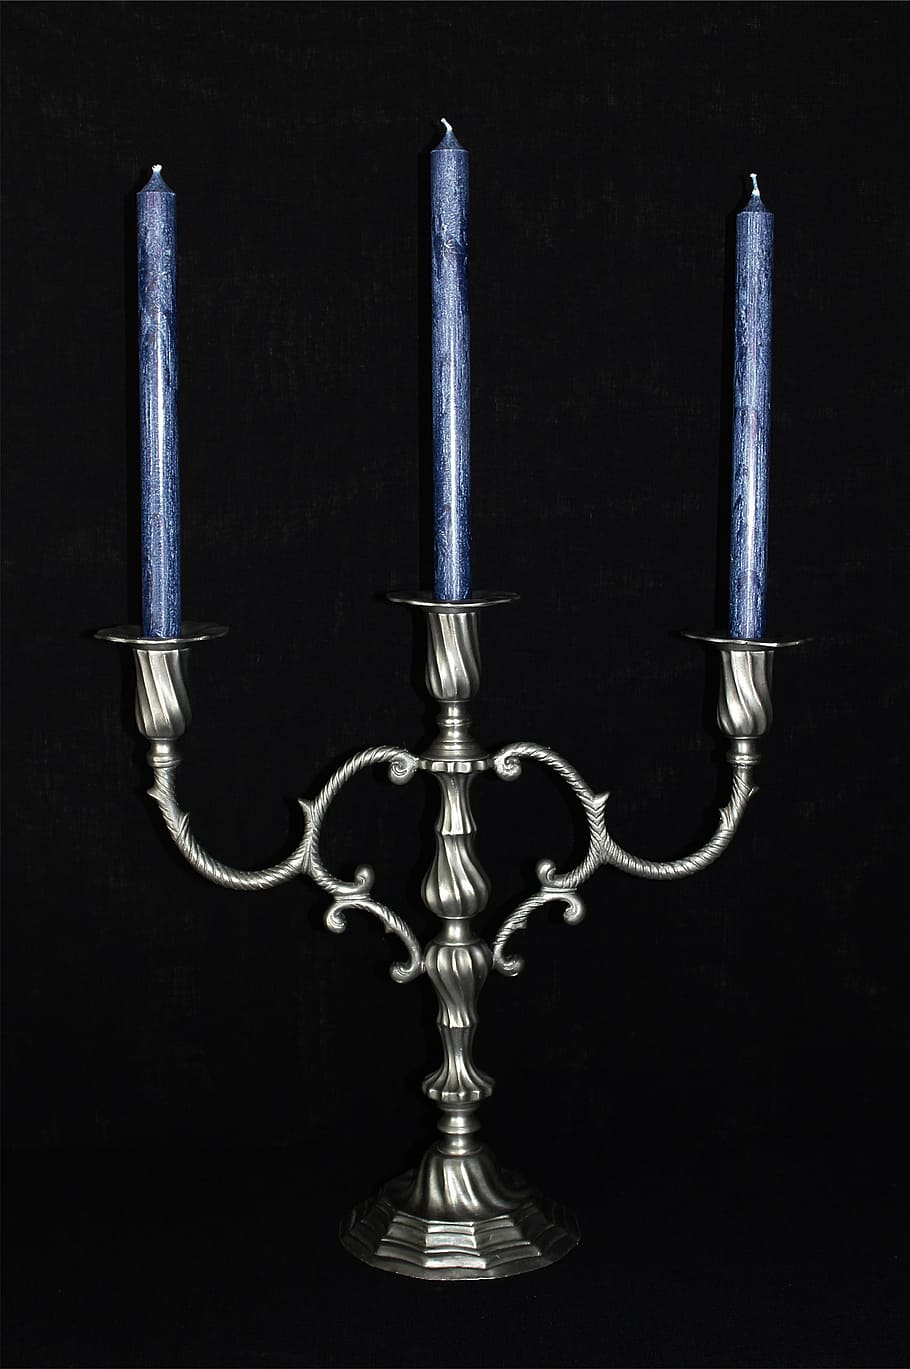 gray, 3-slot, 3- slot candelabra, candles, candlestick, tin chandeliers, three-armed, home decor, setup, style